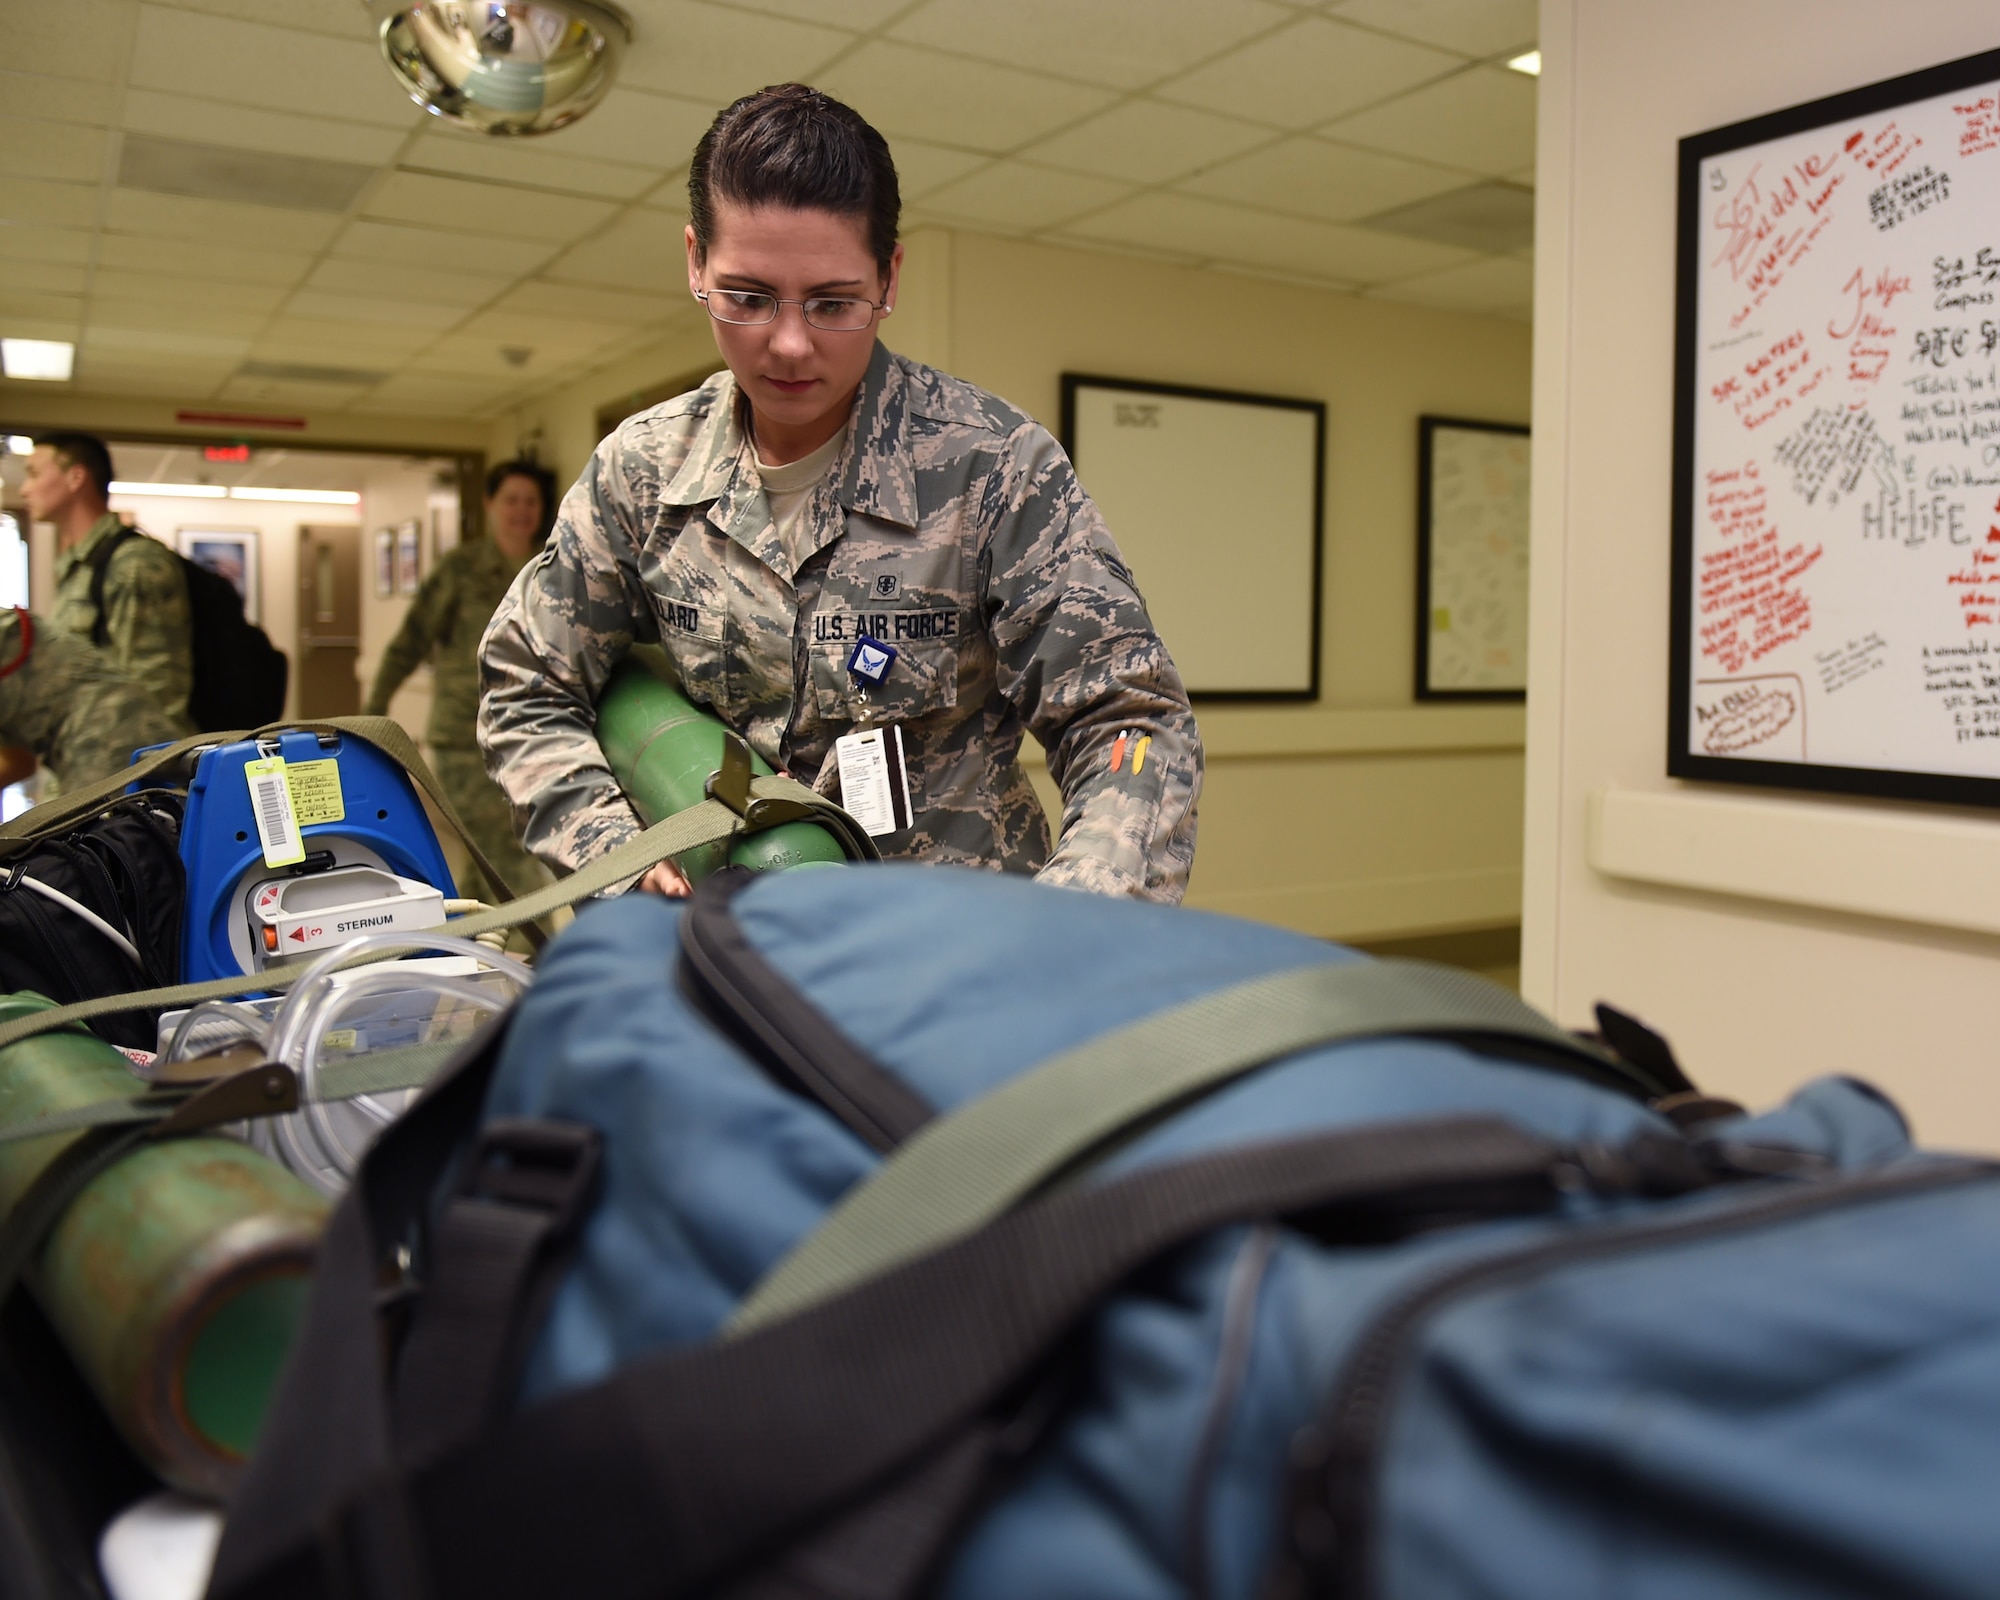 Airman 1st Class Megan Pollard prepares supplies for an incoming aeromedical evacuation flight at the Wilford Hall Ambulatory Surgical Center, Joint Base San Antonio-Lackland, Texas, July 23, 2015. Pollard is part of a 12-person team assigned to the 559th En-Route Patient Staging System that serves as the Midwest aeromedical evacuation hub for wounded warriors transiting back home or here for specialty care. (U.S. Air Force photo by Staff Sgt. Jerilyn Quintanilla)